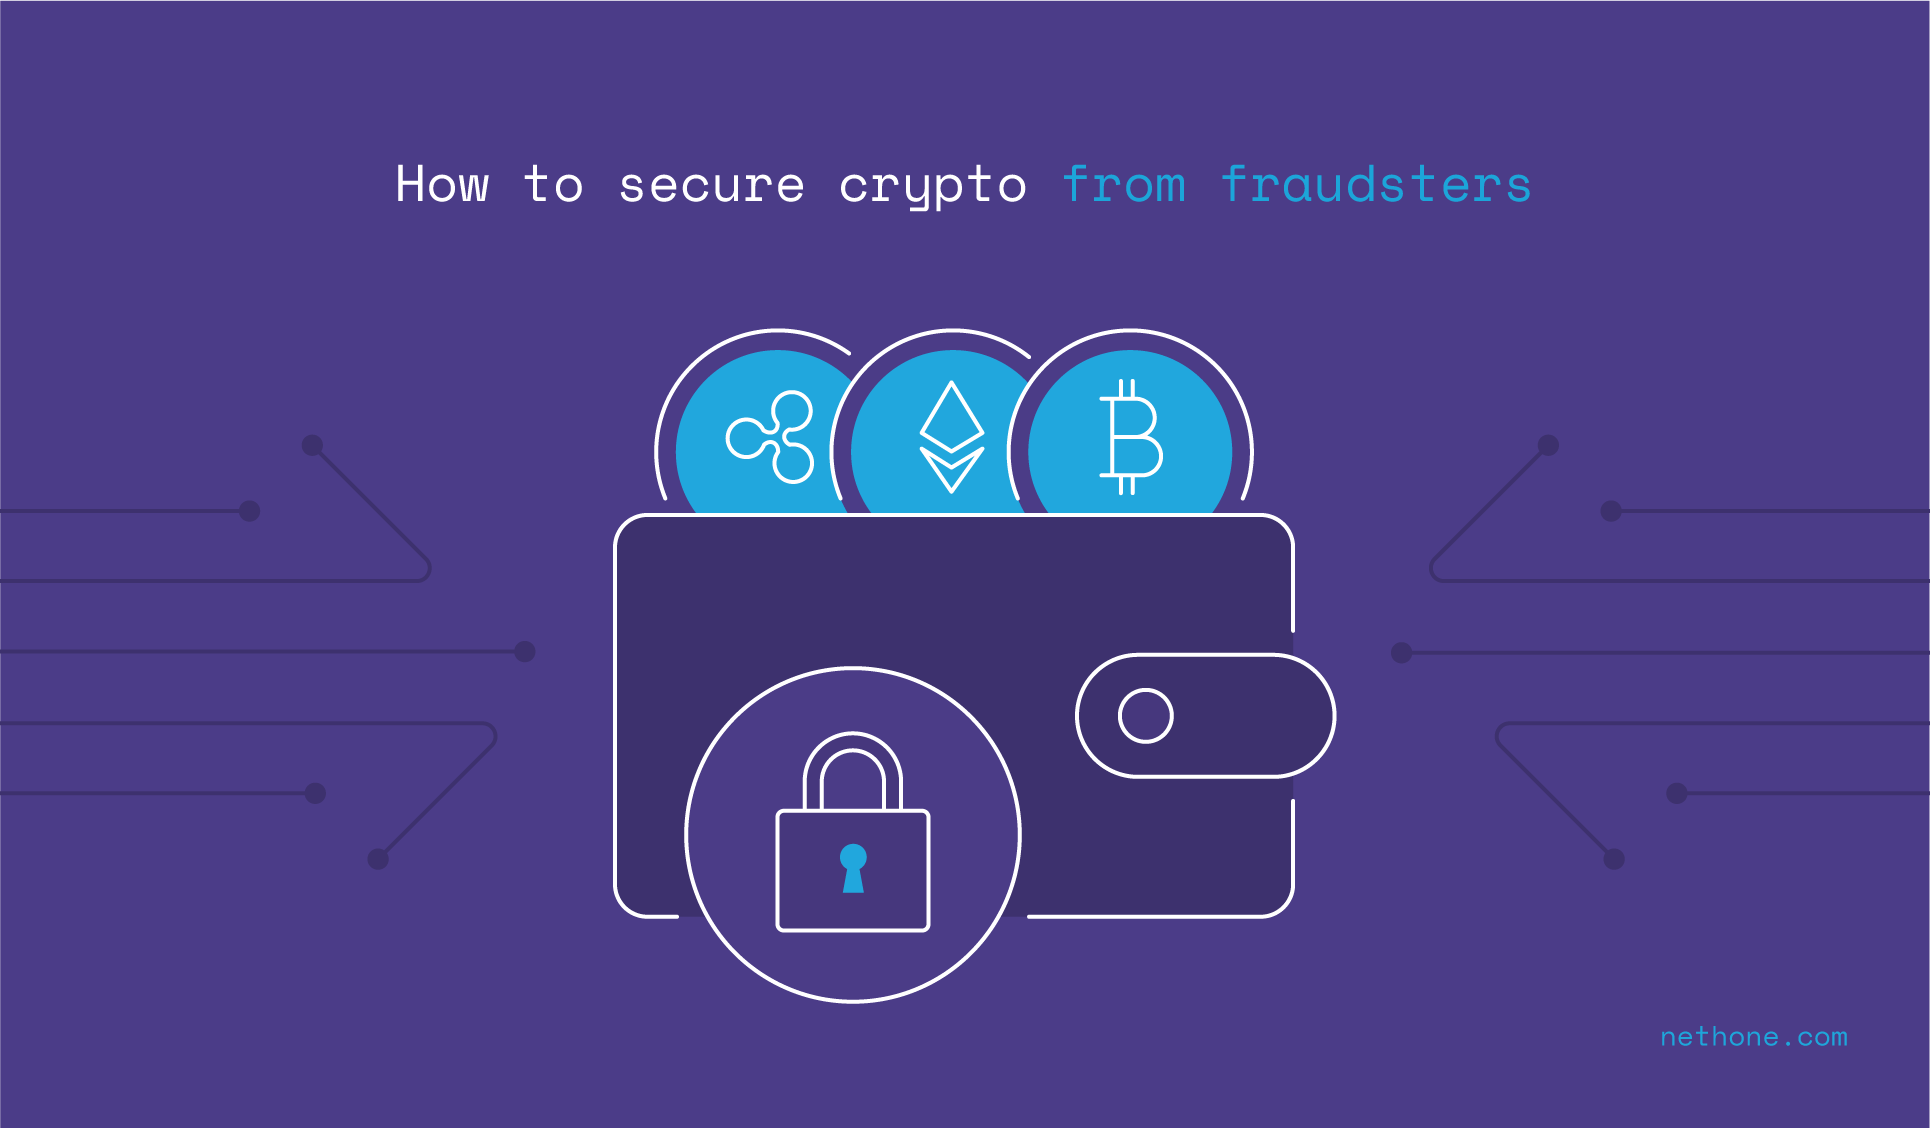 Cryptocurrency fraud prevention